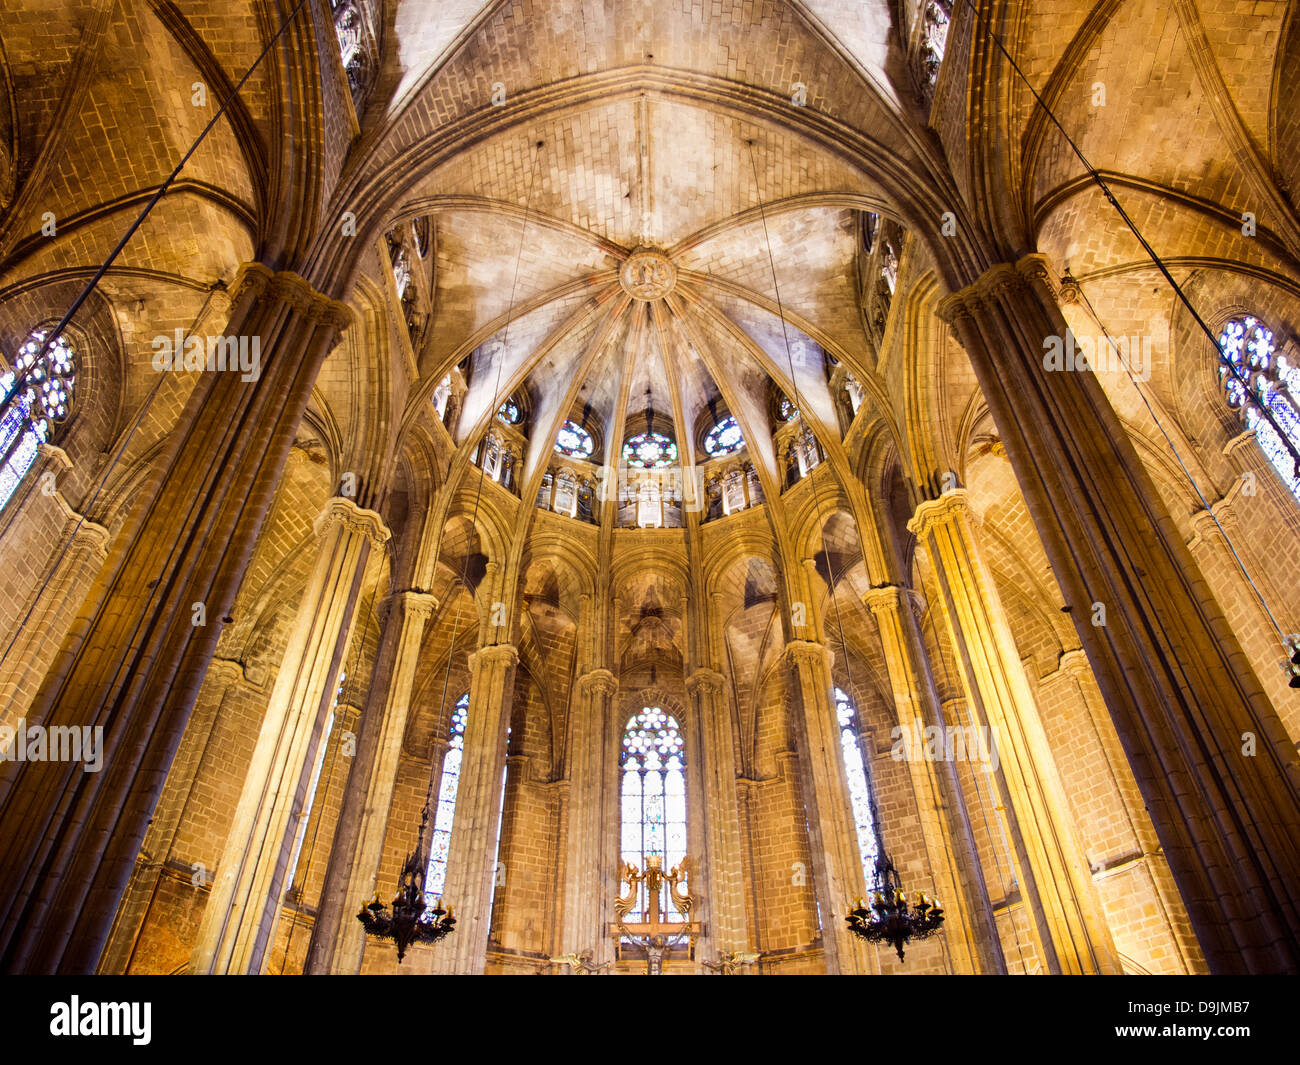 Interior of the Santa Eulalia Cathedral in Barcelona's Gothic Quarter, Spain 1 Stock Photo